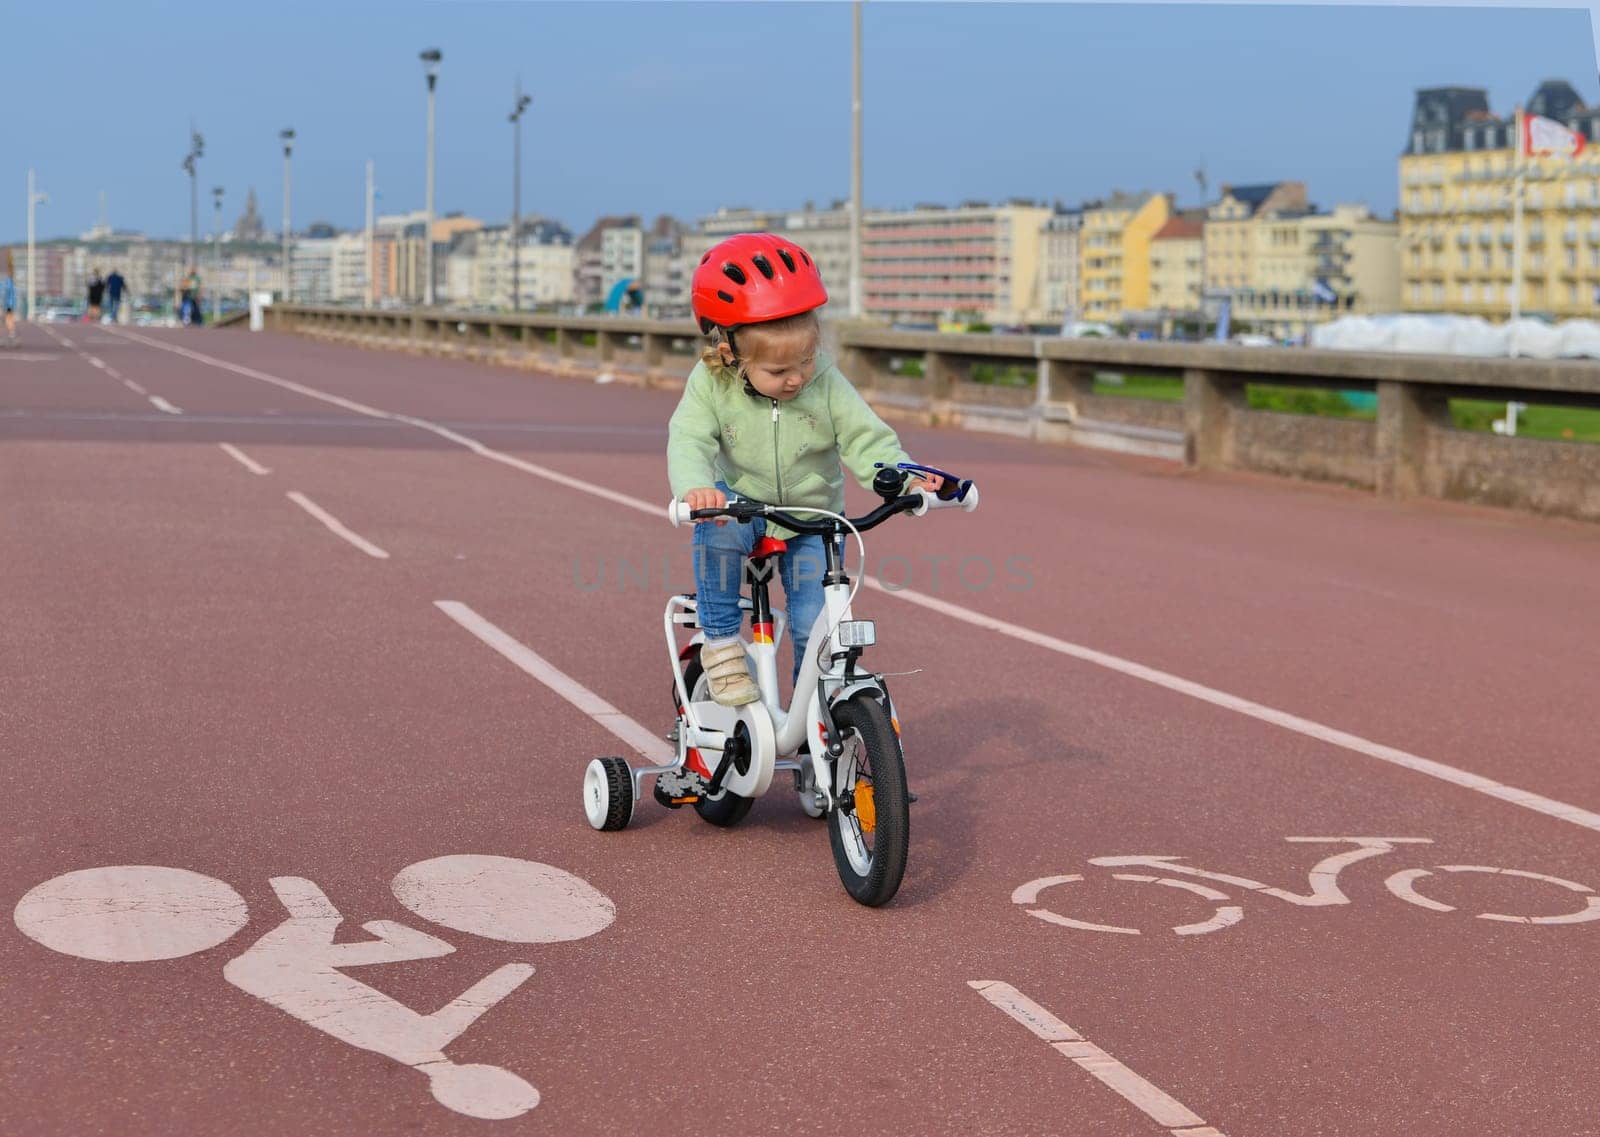 3 Years old Girl in helmet learns riding a four-wheeled bicycle